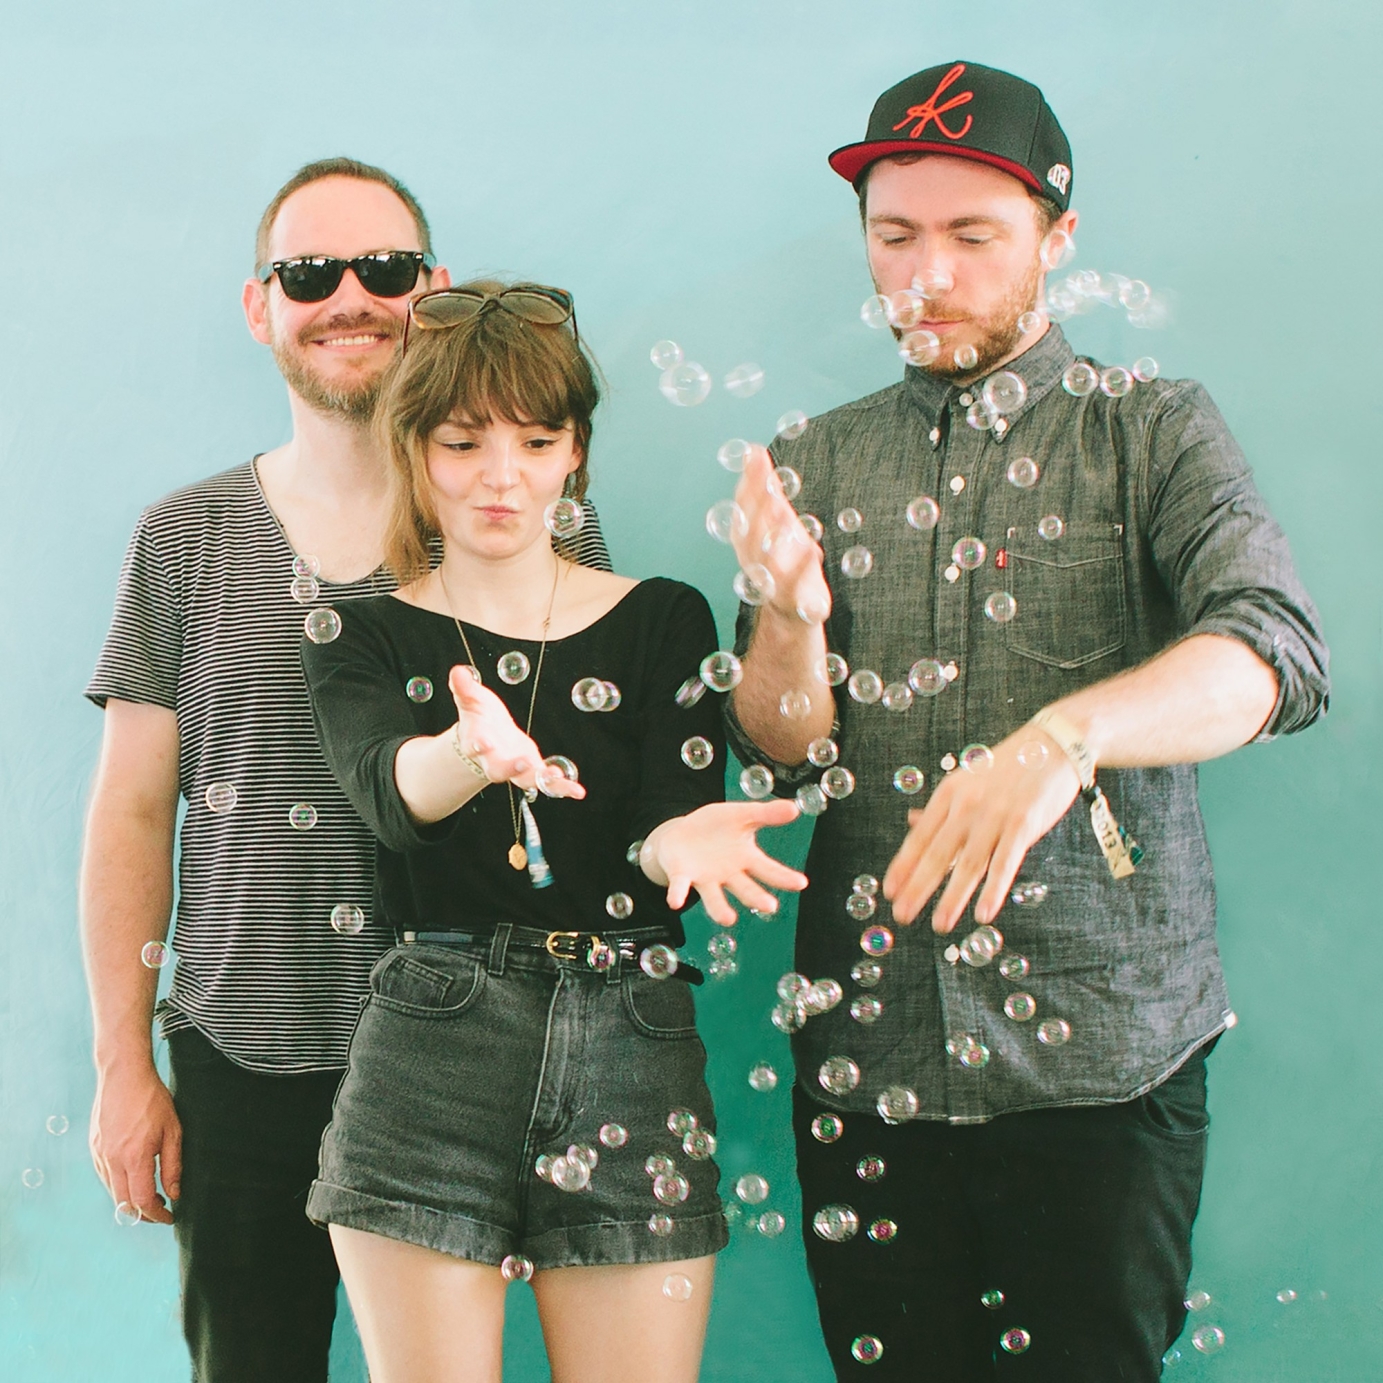 Photography for Chvrches by chadkamenshine